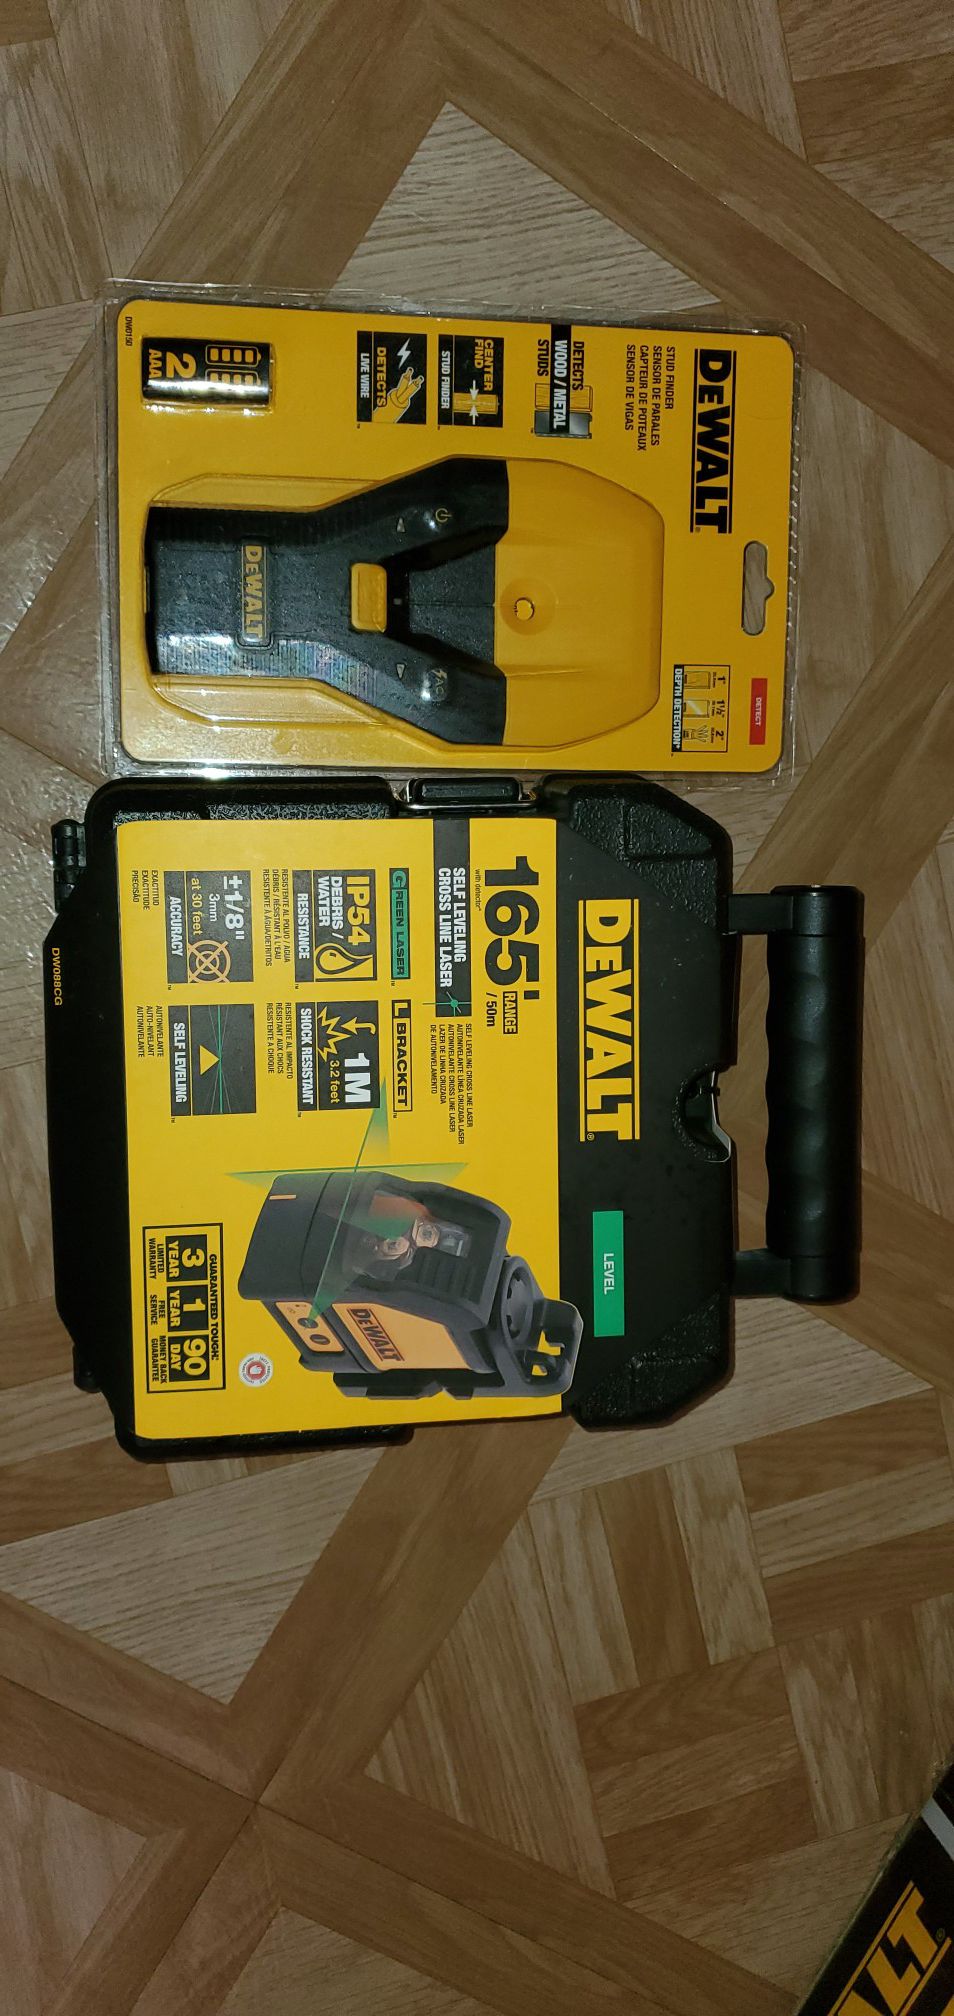 Green Cross Line Laser Level with Stud Finder Firm price